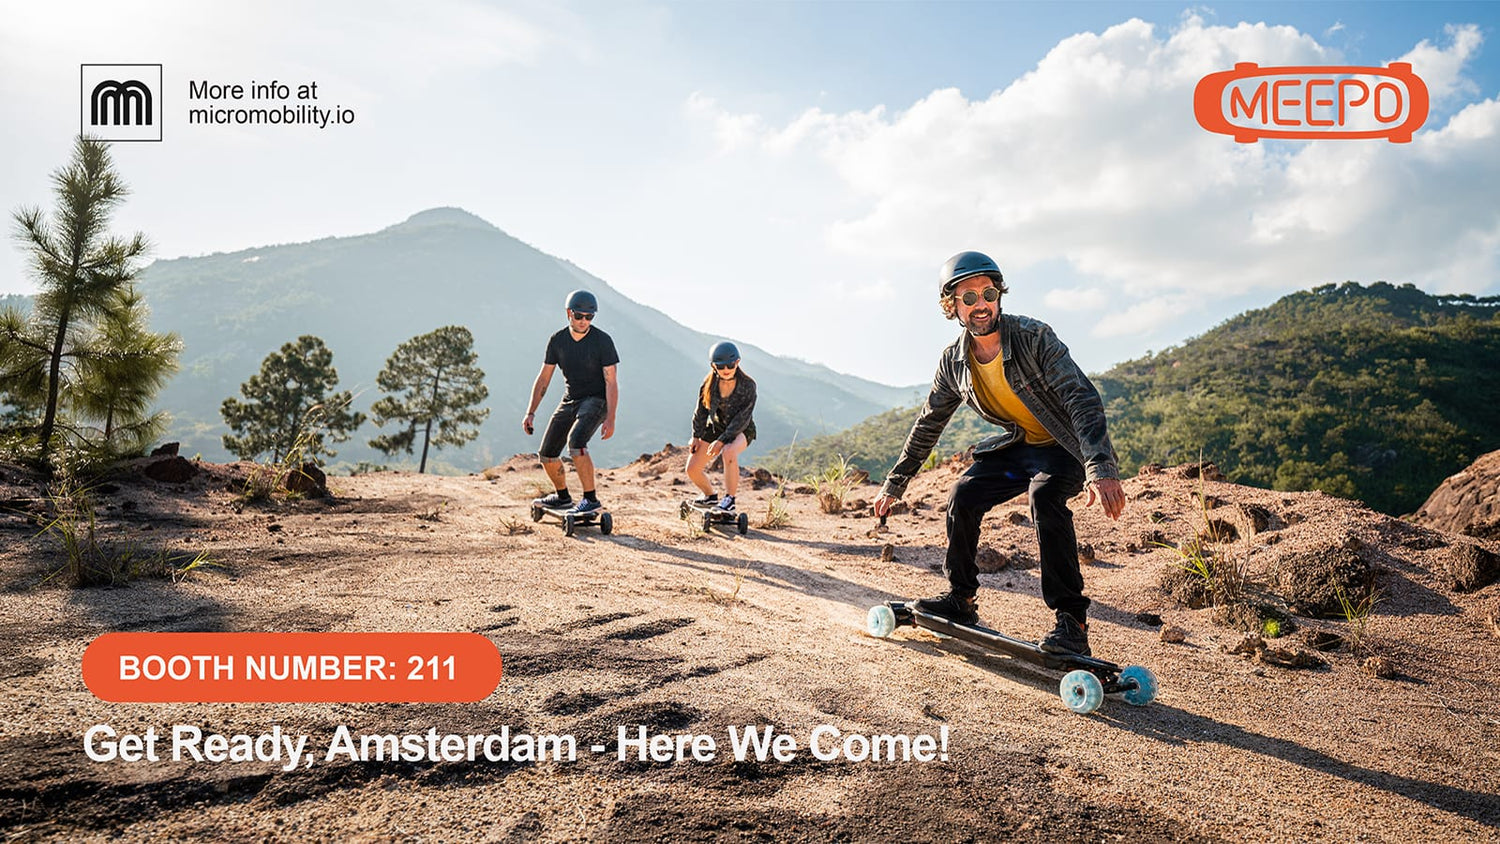 Come Meet Meepo in Amsterdam at the Micromobility Europe Summit